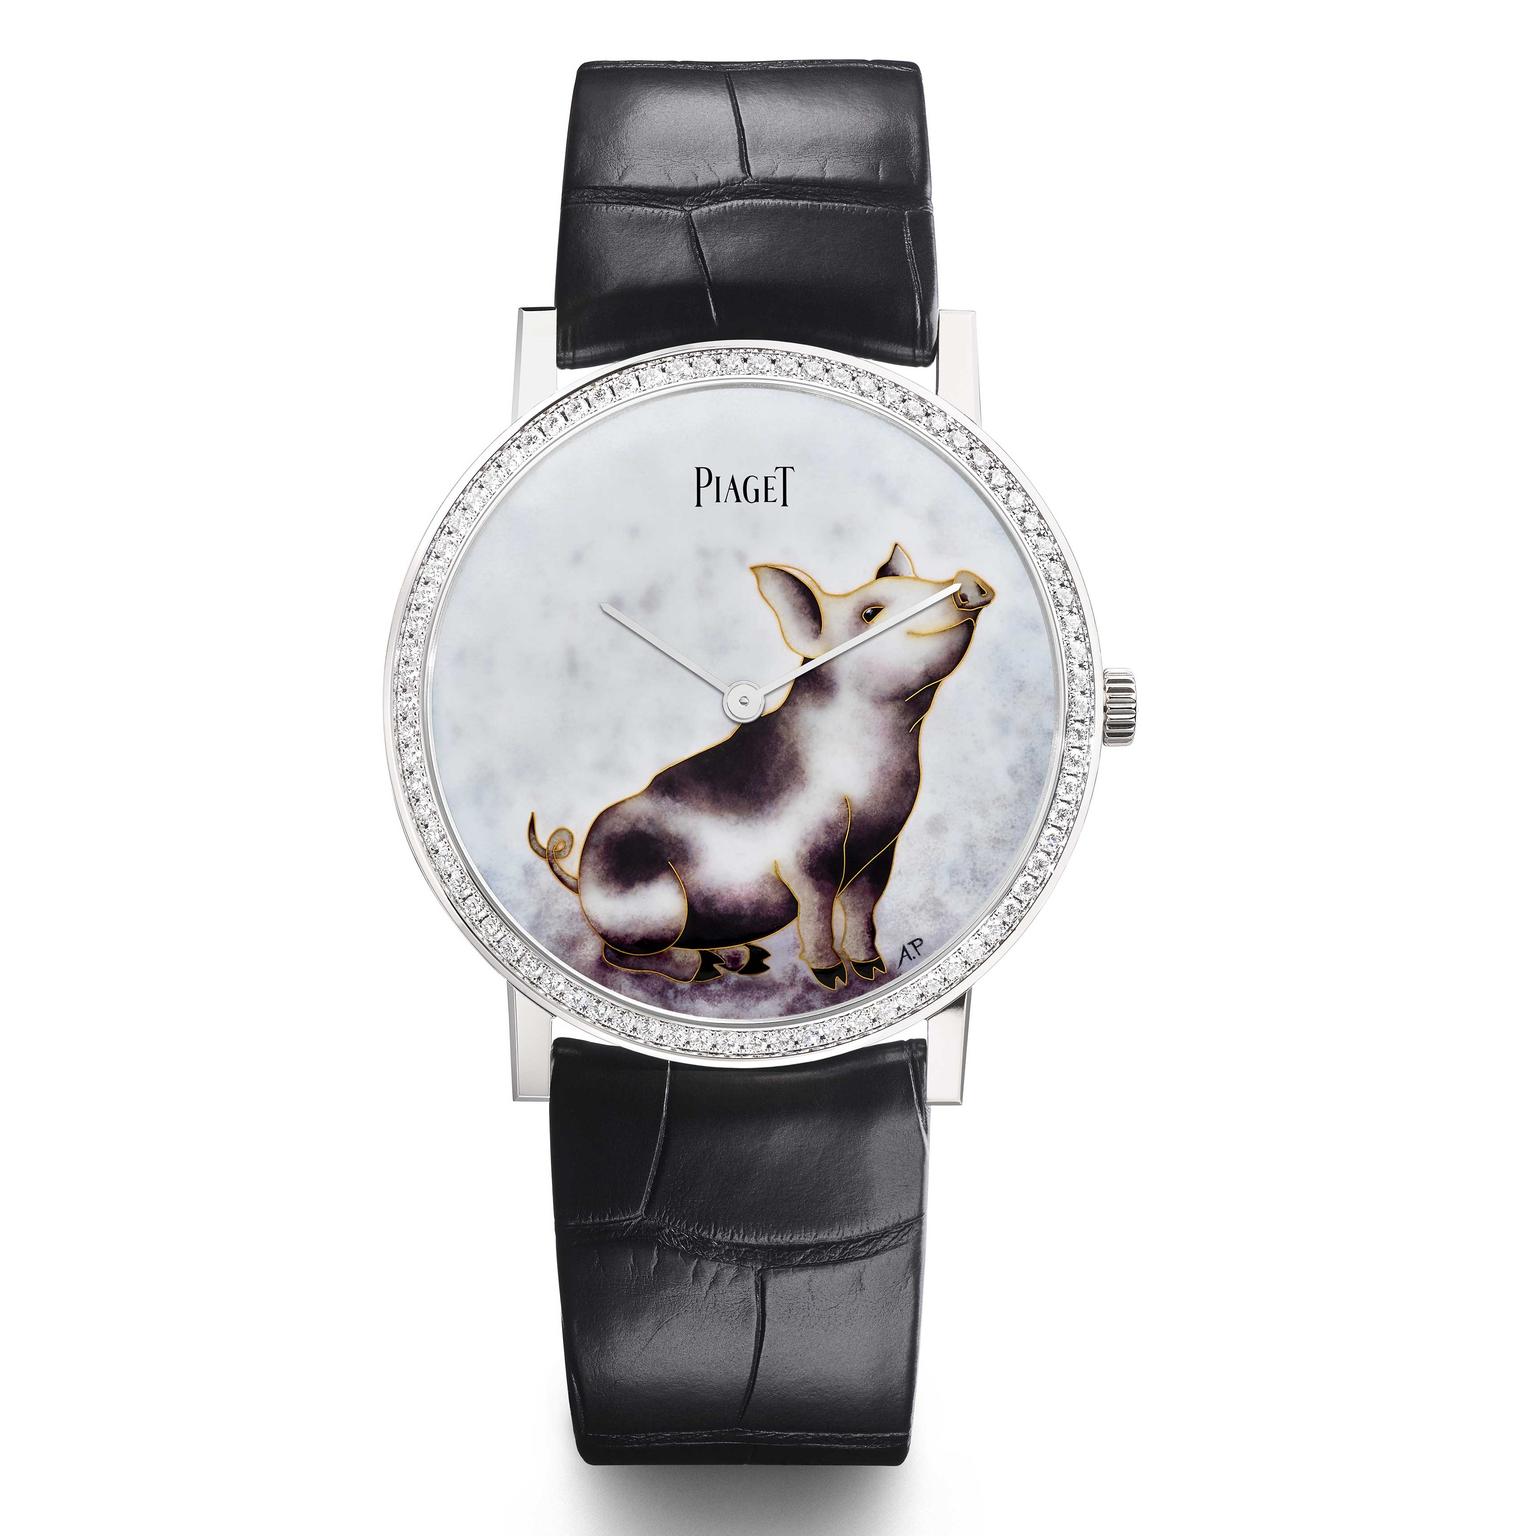 Piaget Altiplano Chinese New Year Pig watch